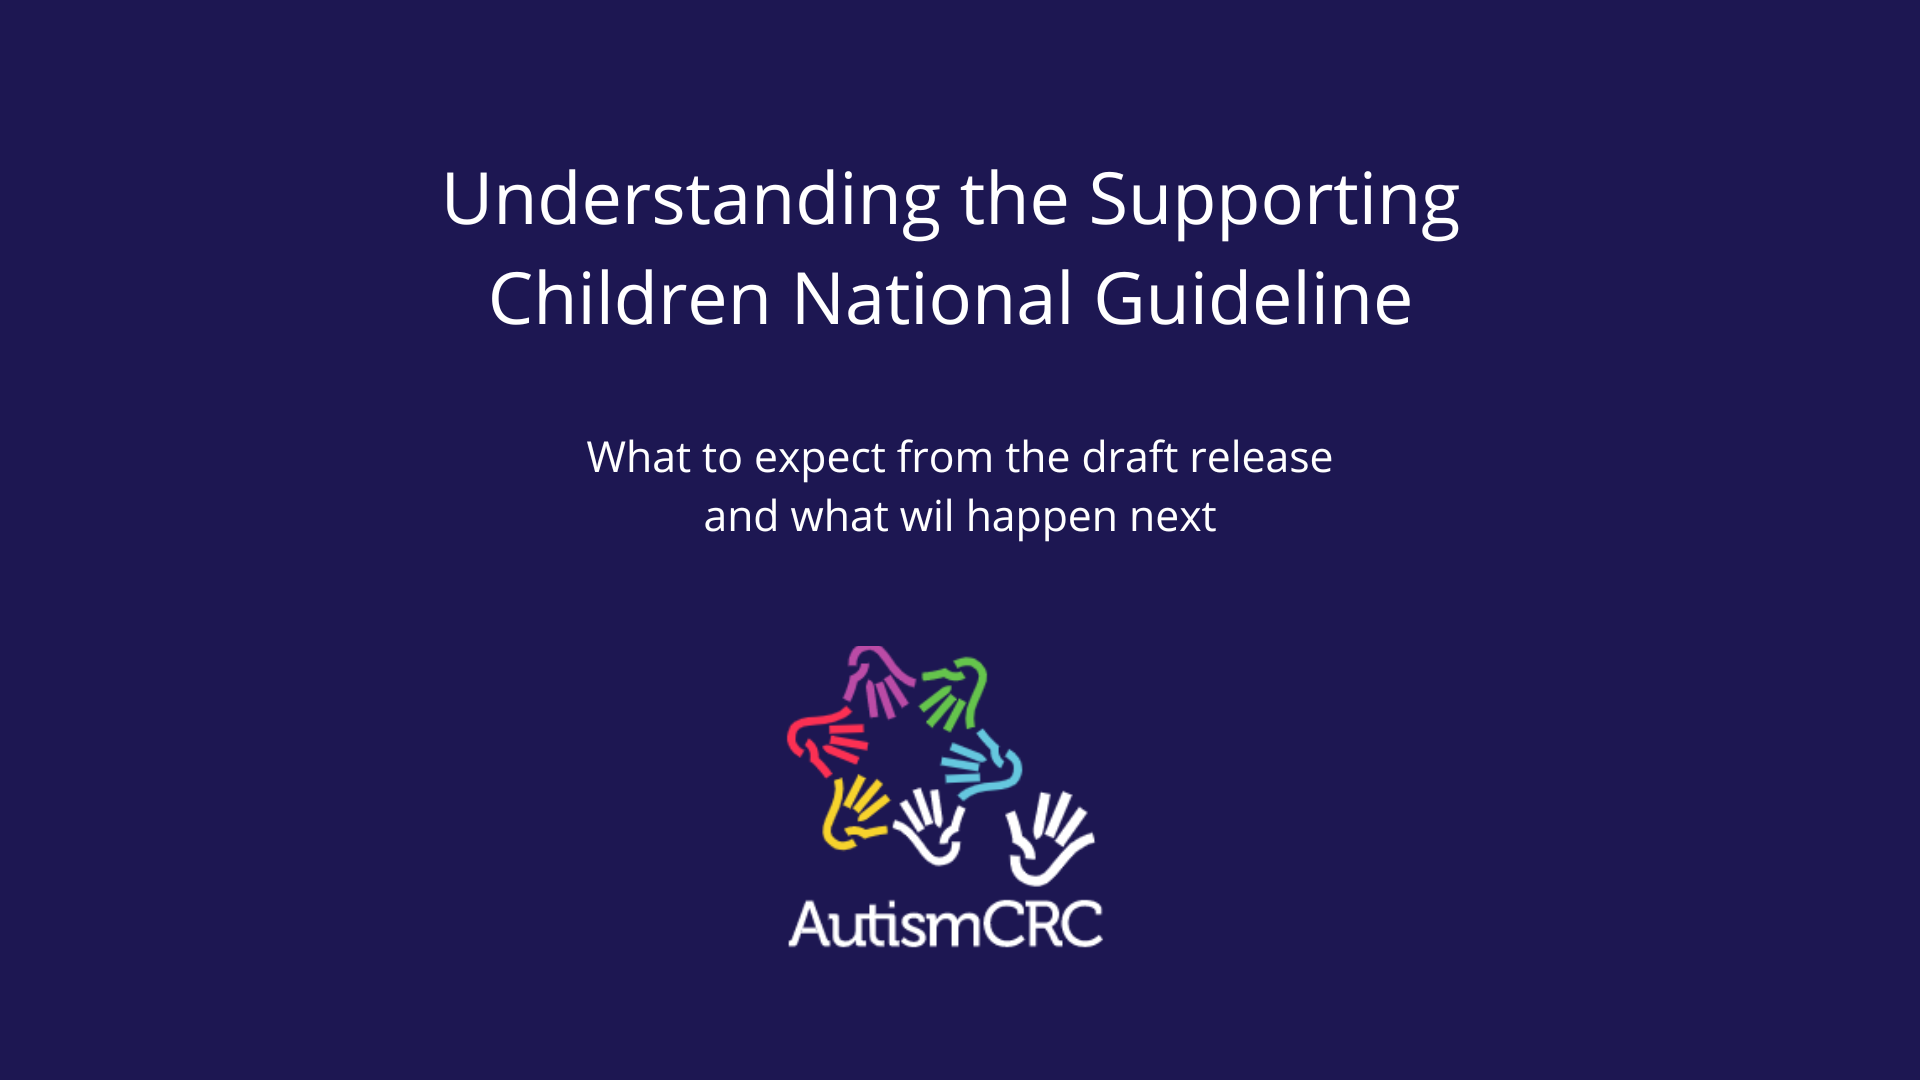 Your chance to contribute and review the National Autism Guidelines